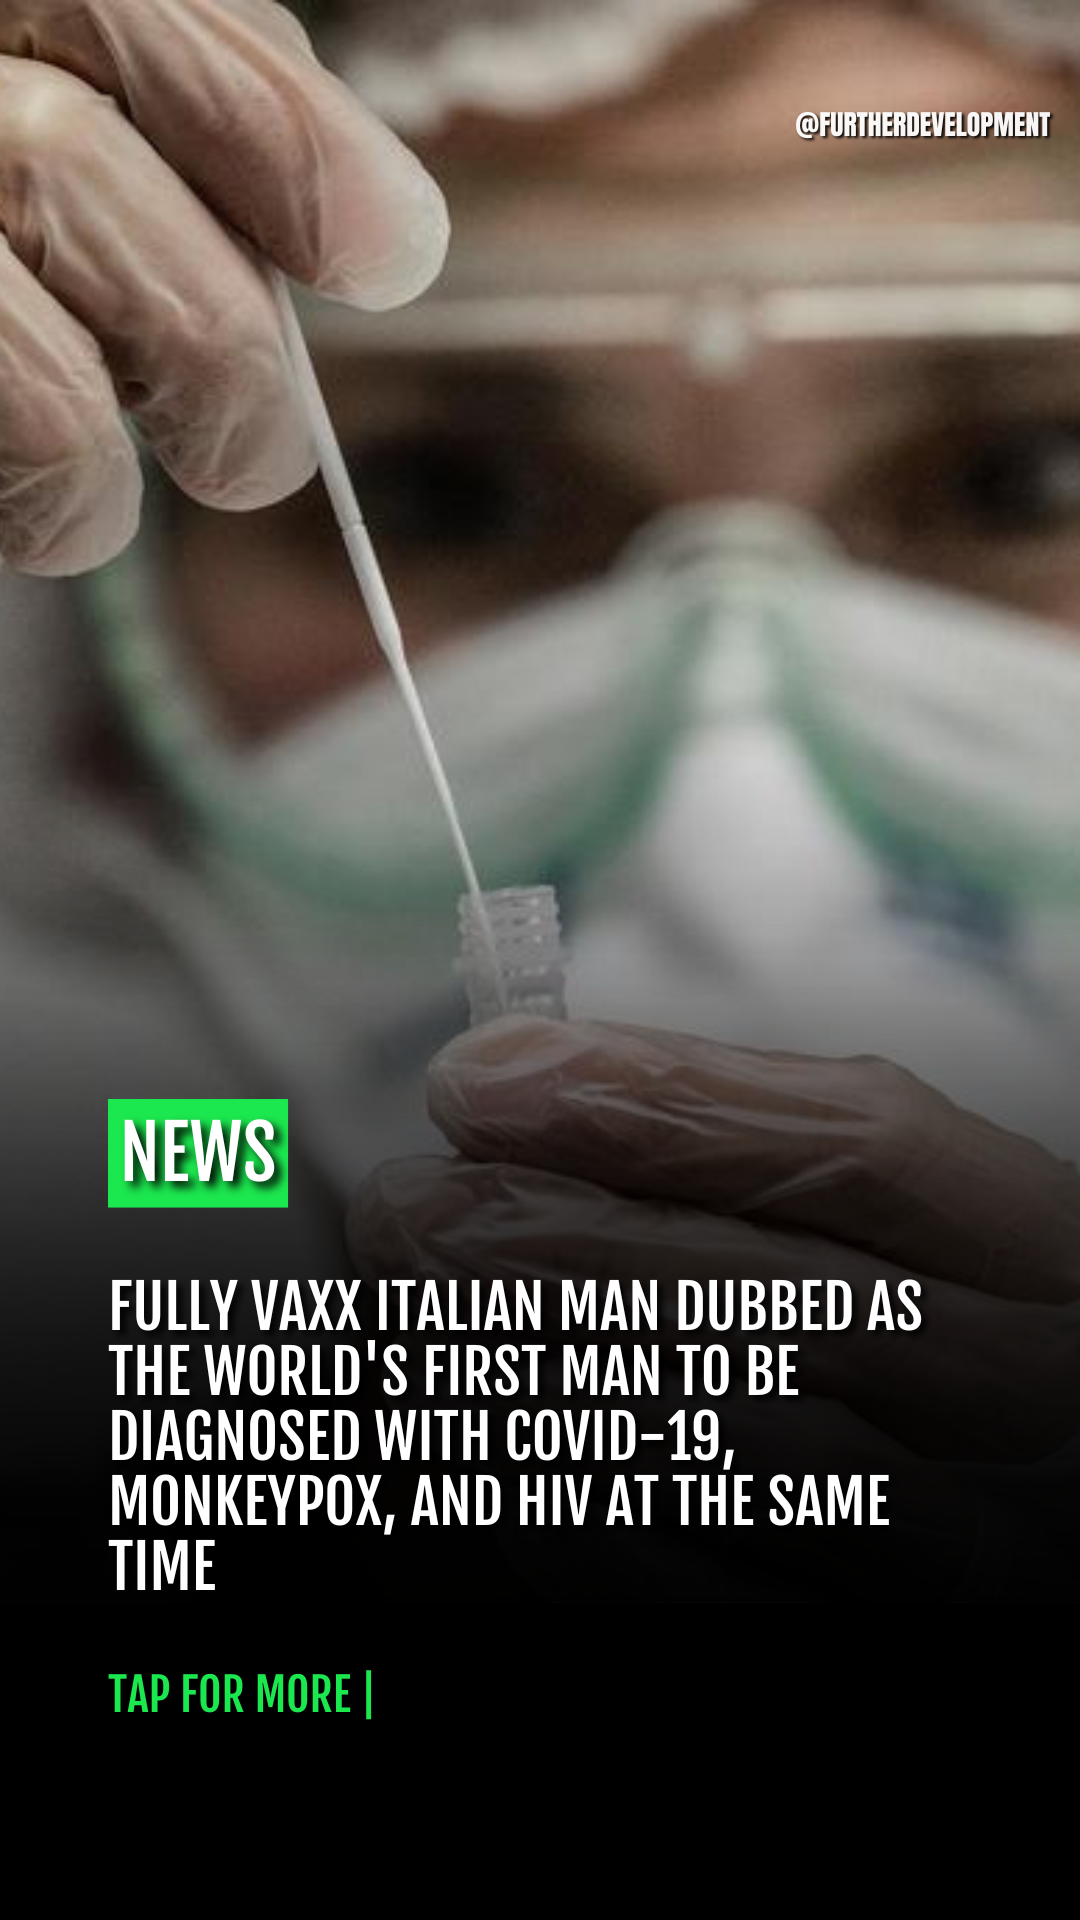 Fully Vaxx Italian Man Dubbed as the World's First Man to be Diagnosed with COVID-19, Monkeypox, and HIV at the Same Time